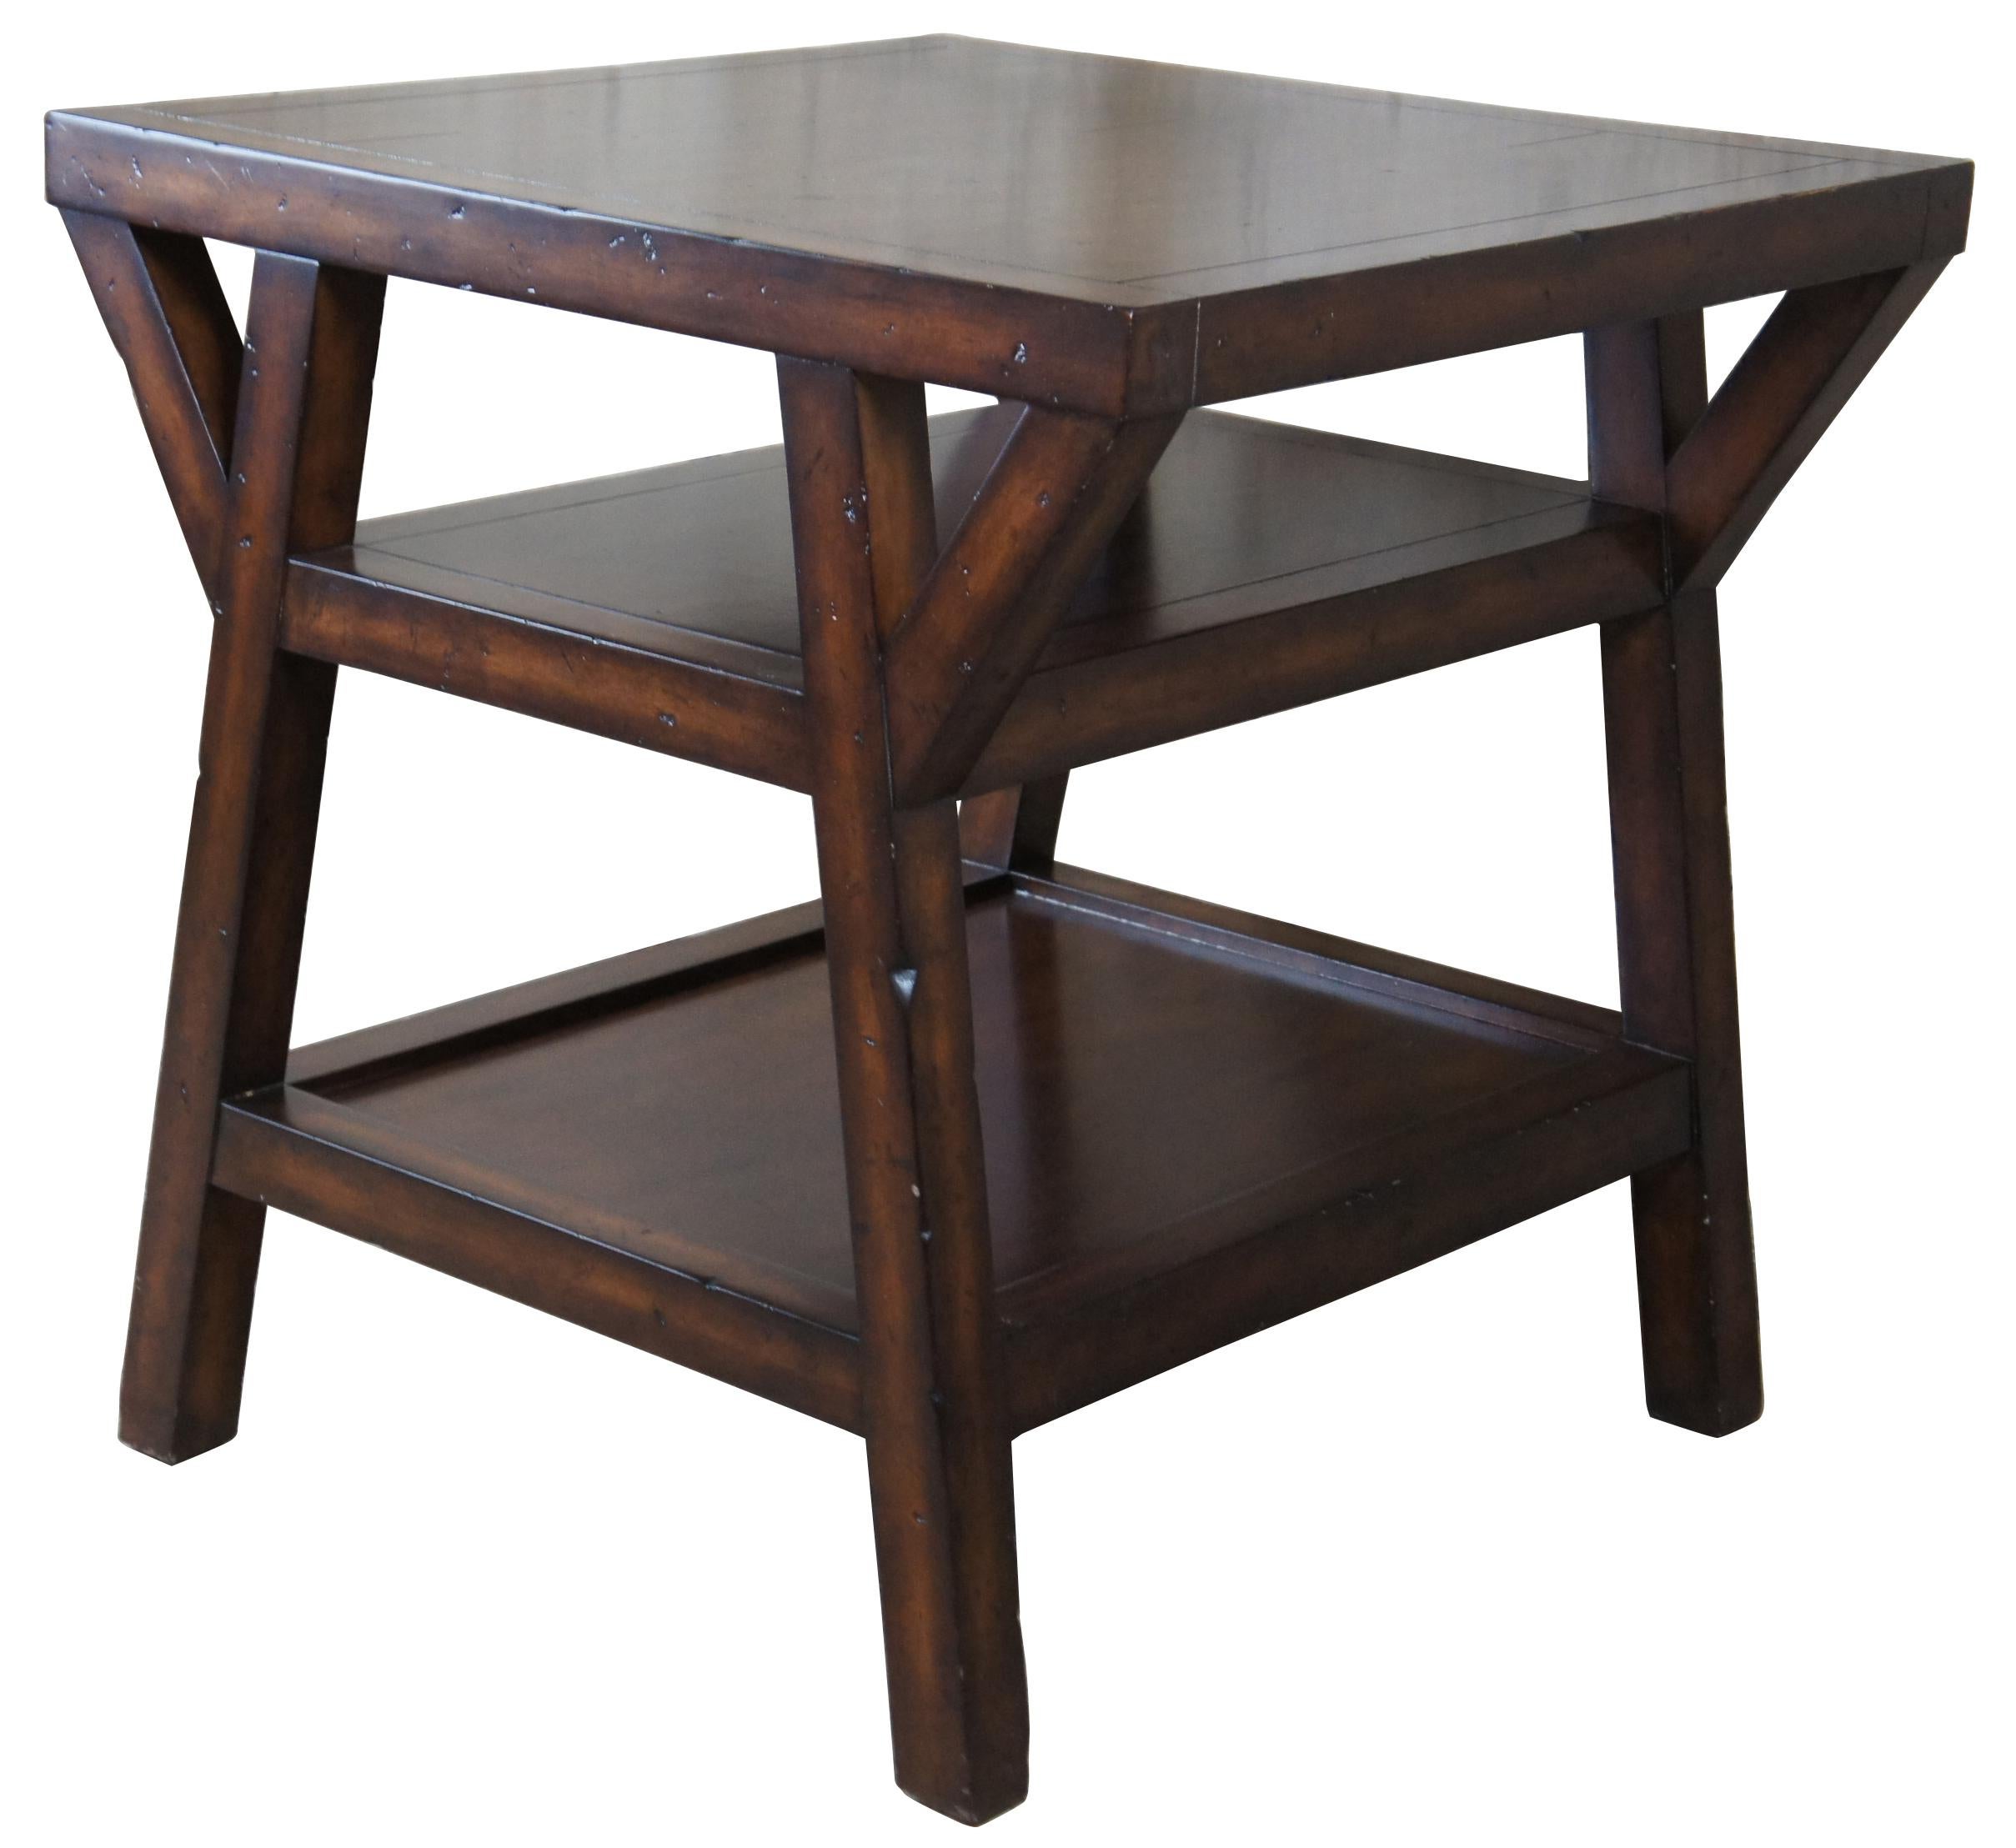 Square tiered side table by Lauren Ralph Lauren. Made from mahogany with a naturally distressed finish. Features a three tiered design with paneled top and inset lower shelf. Measures: 30”.
   